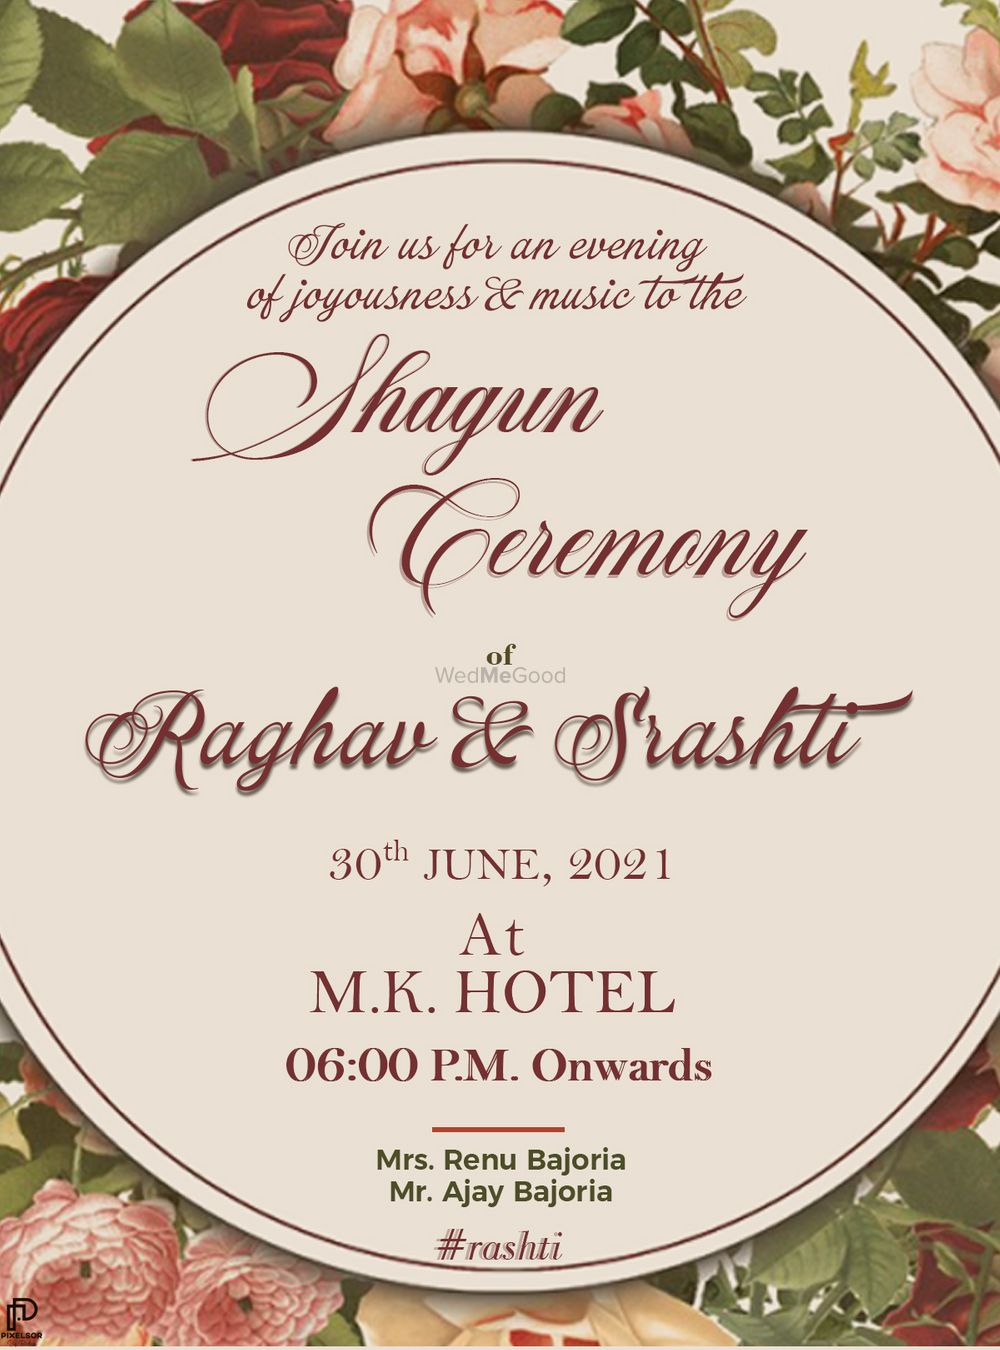 Photo From Raghav and Srashti - By Pixelsor by Ridhi